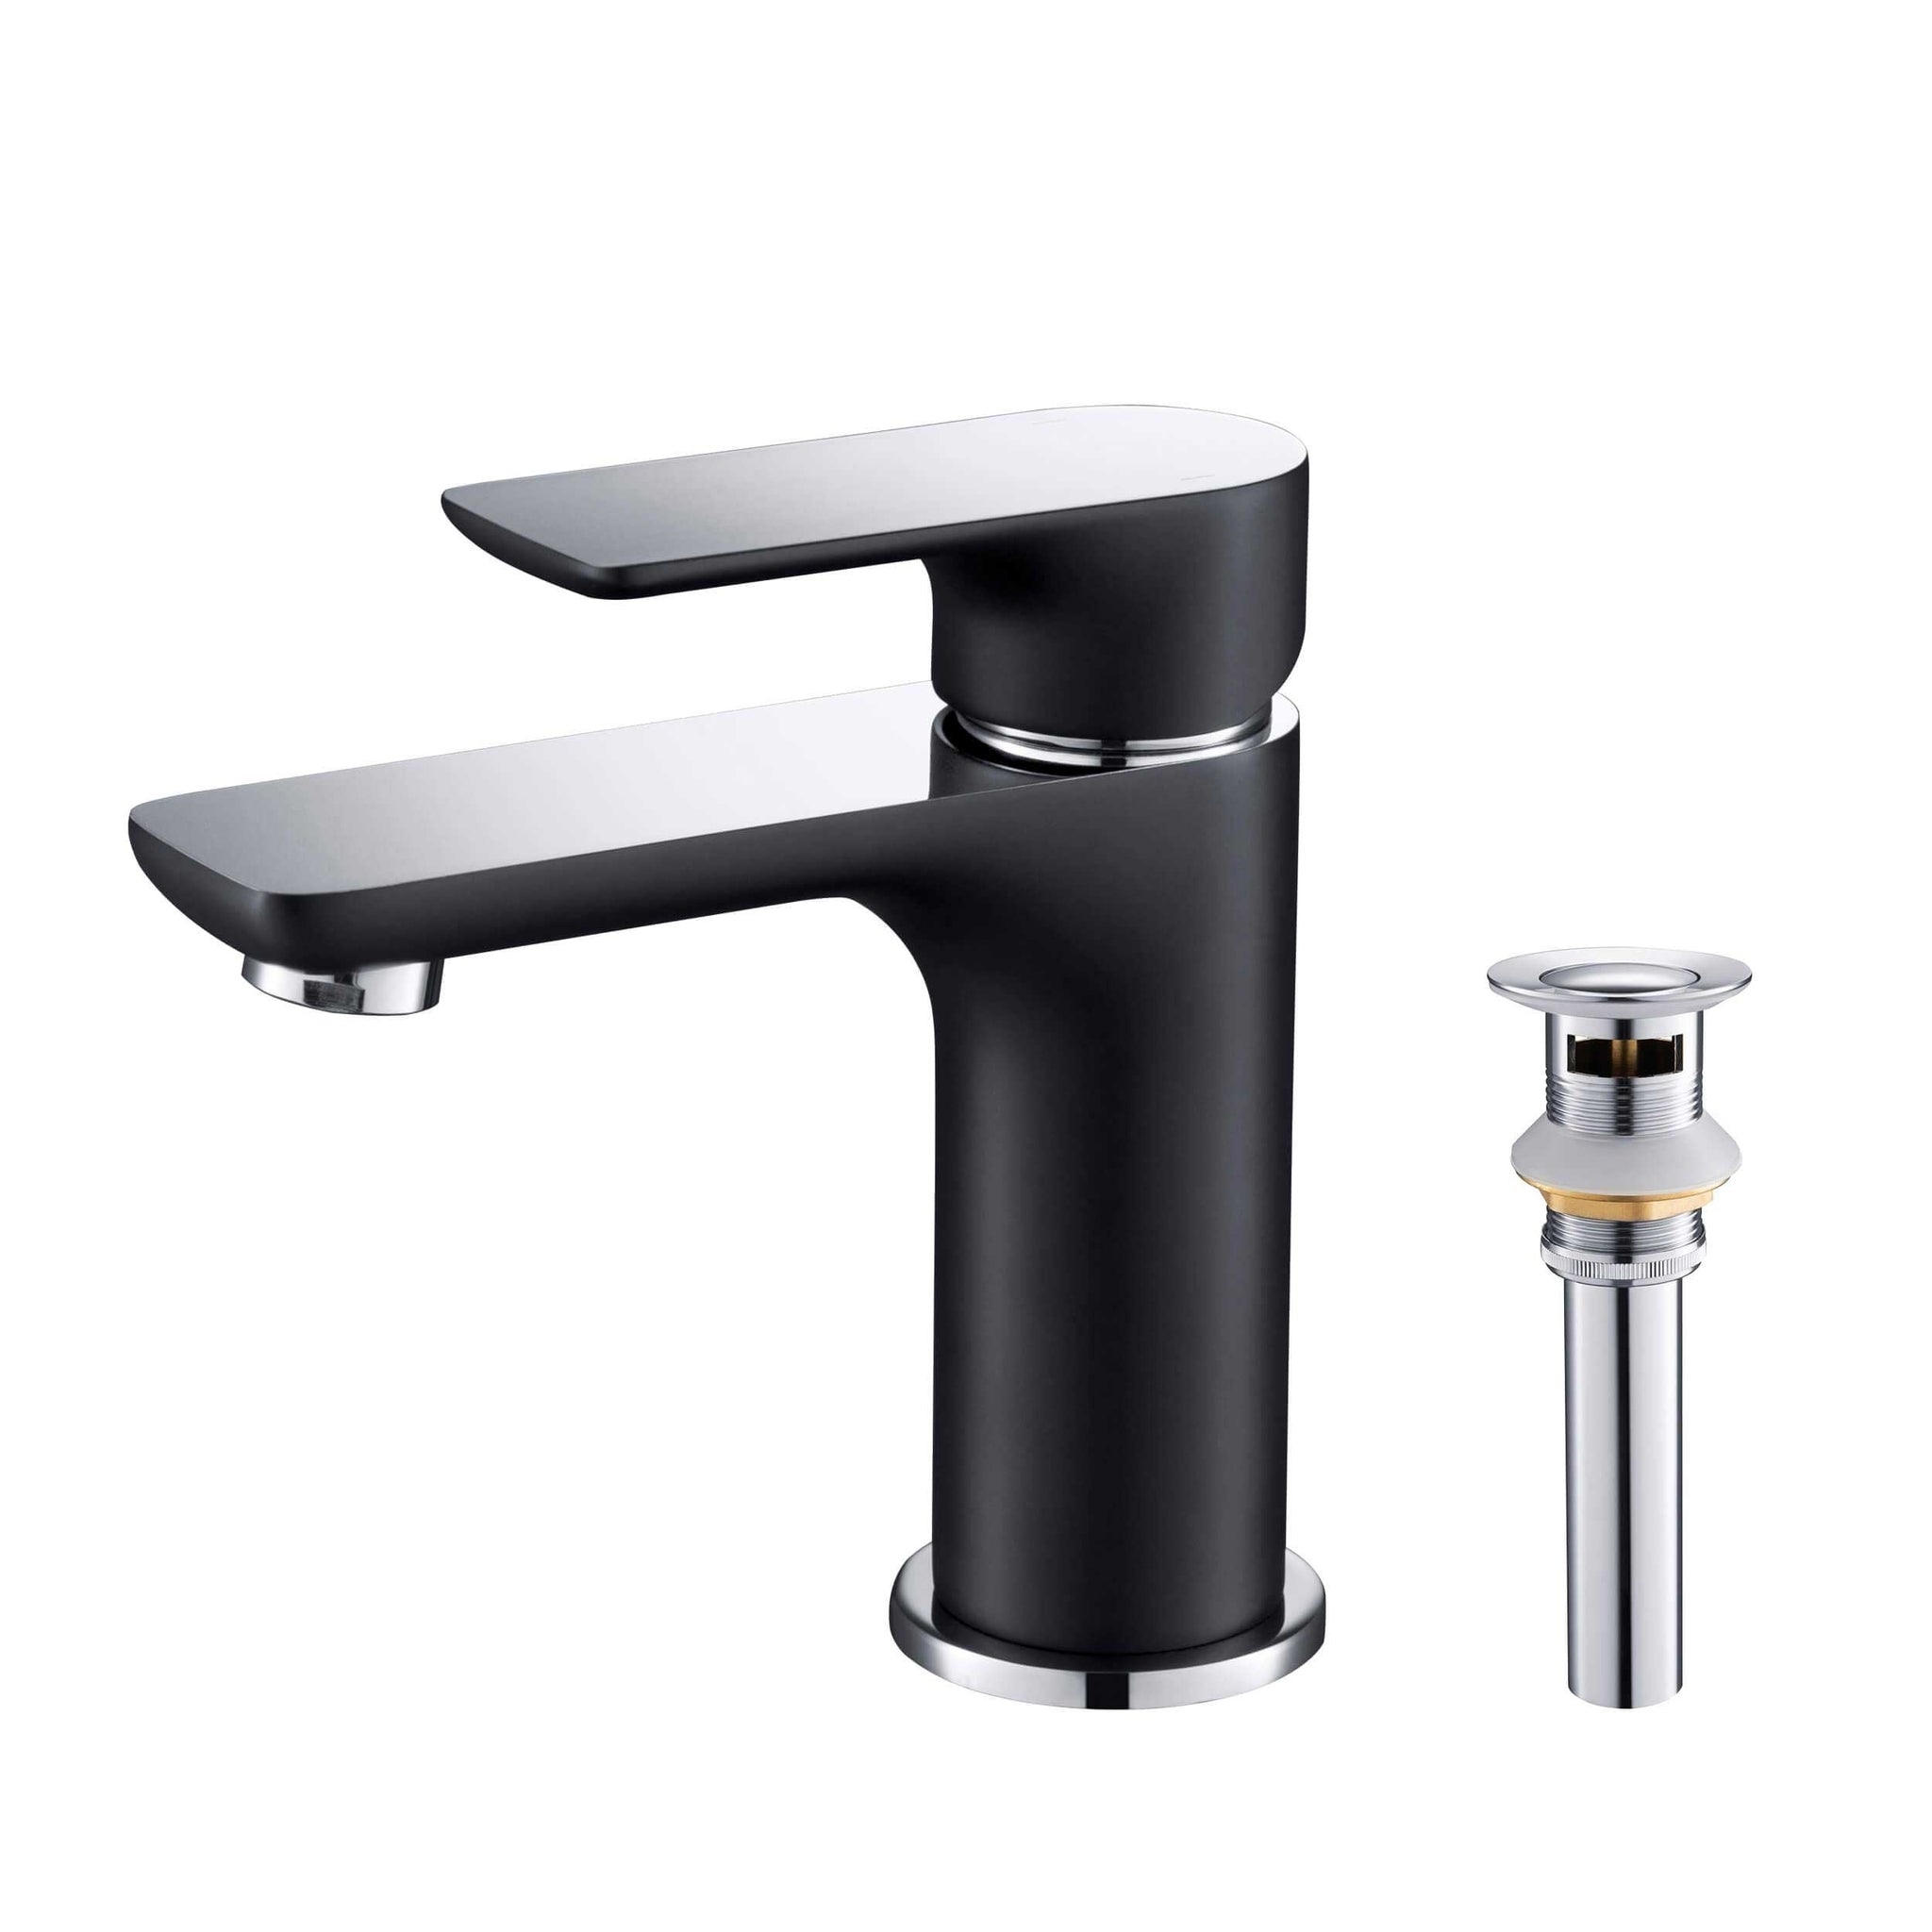 KIBI, KIBI Tender Single Handle Black Solid Brass Bathroom Sink Faucet With Chrome Pop-Up Drain Stopper Small Cover With Overflow